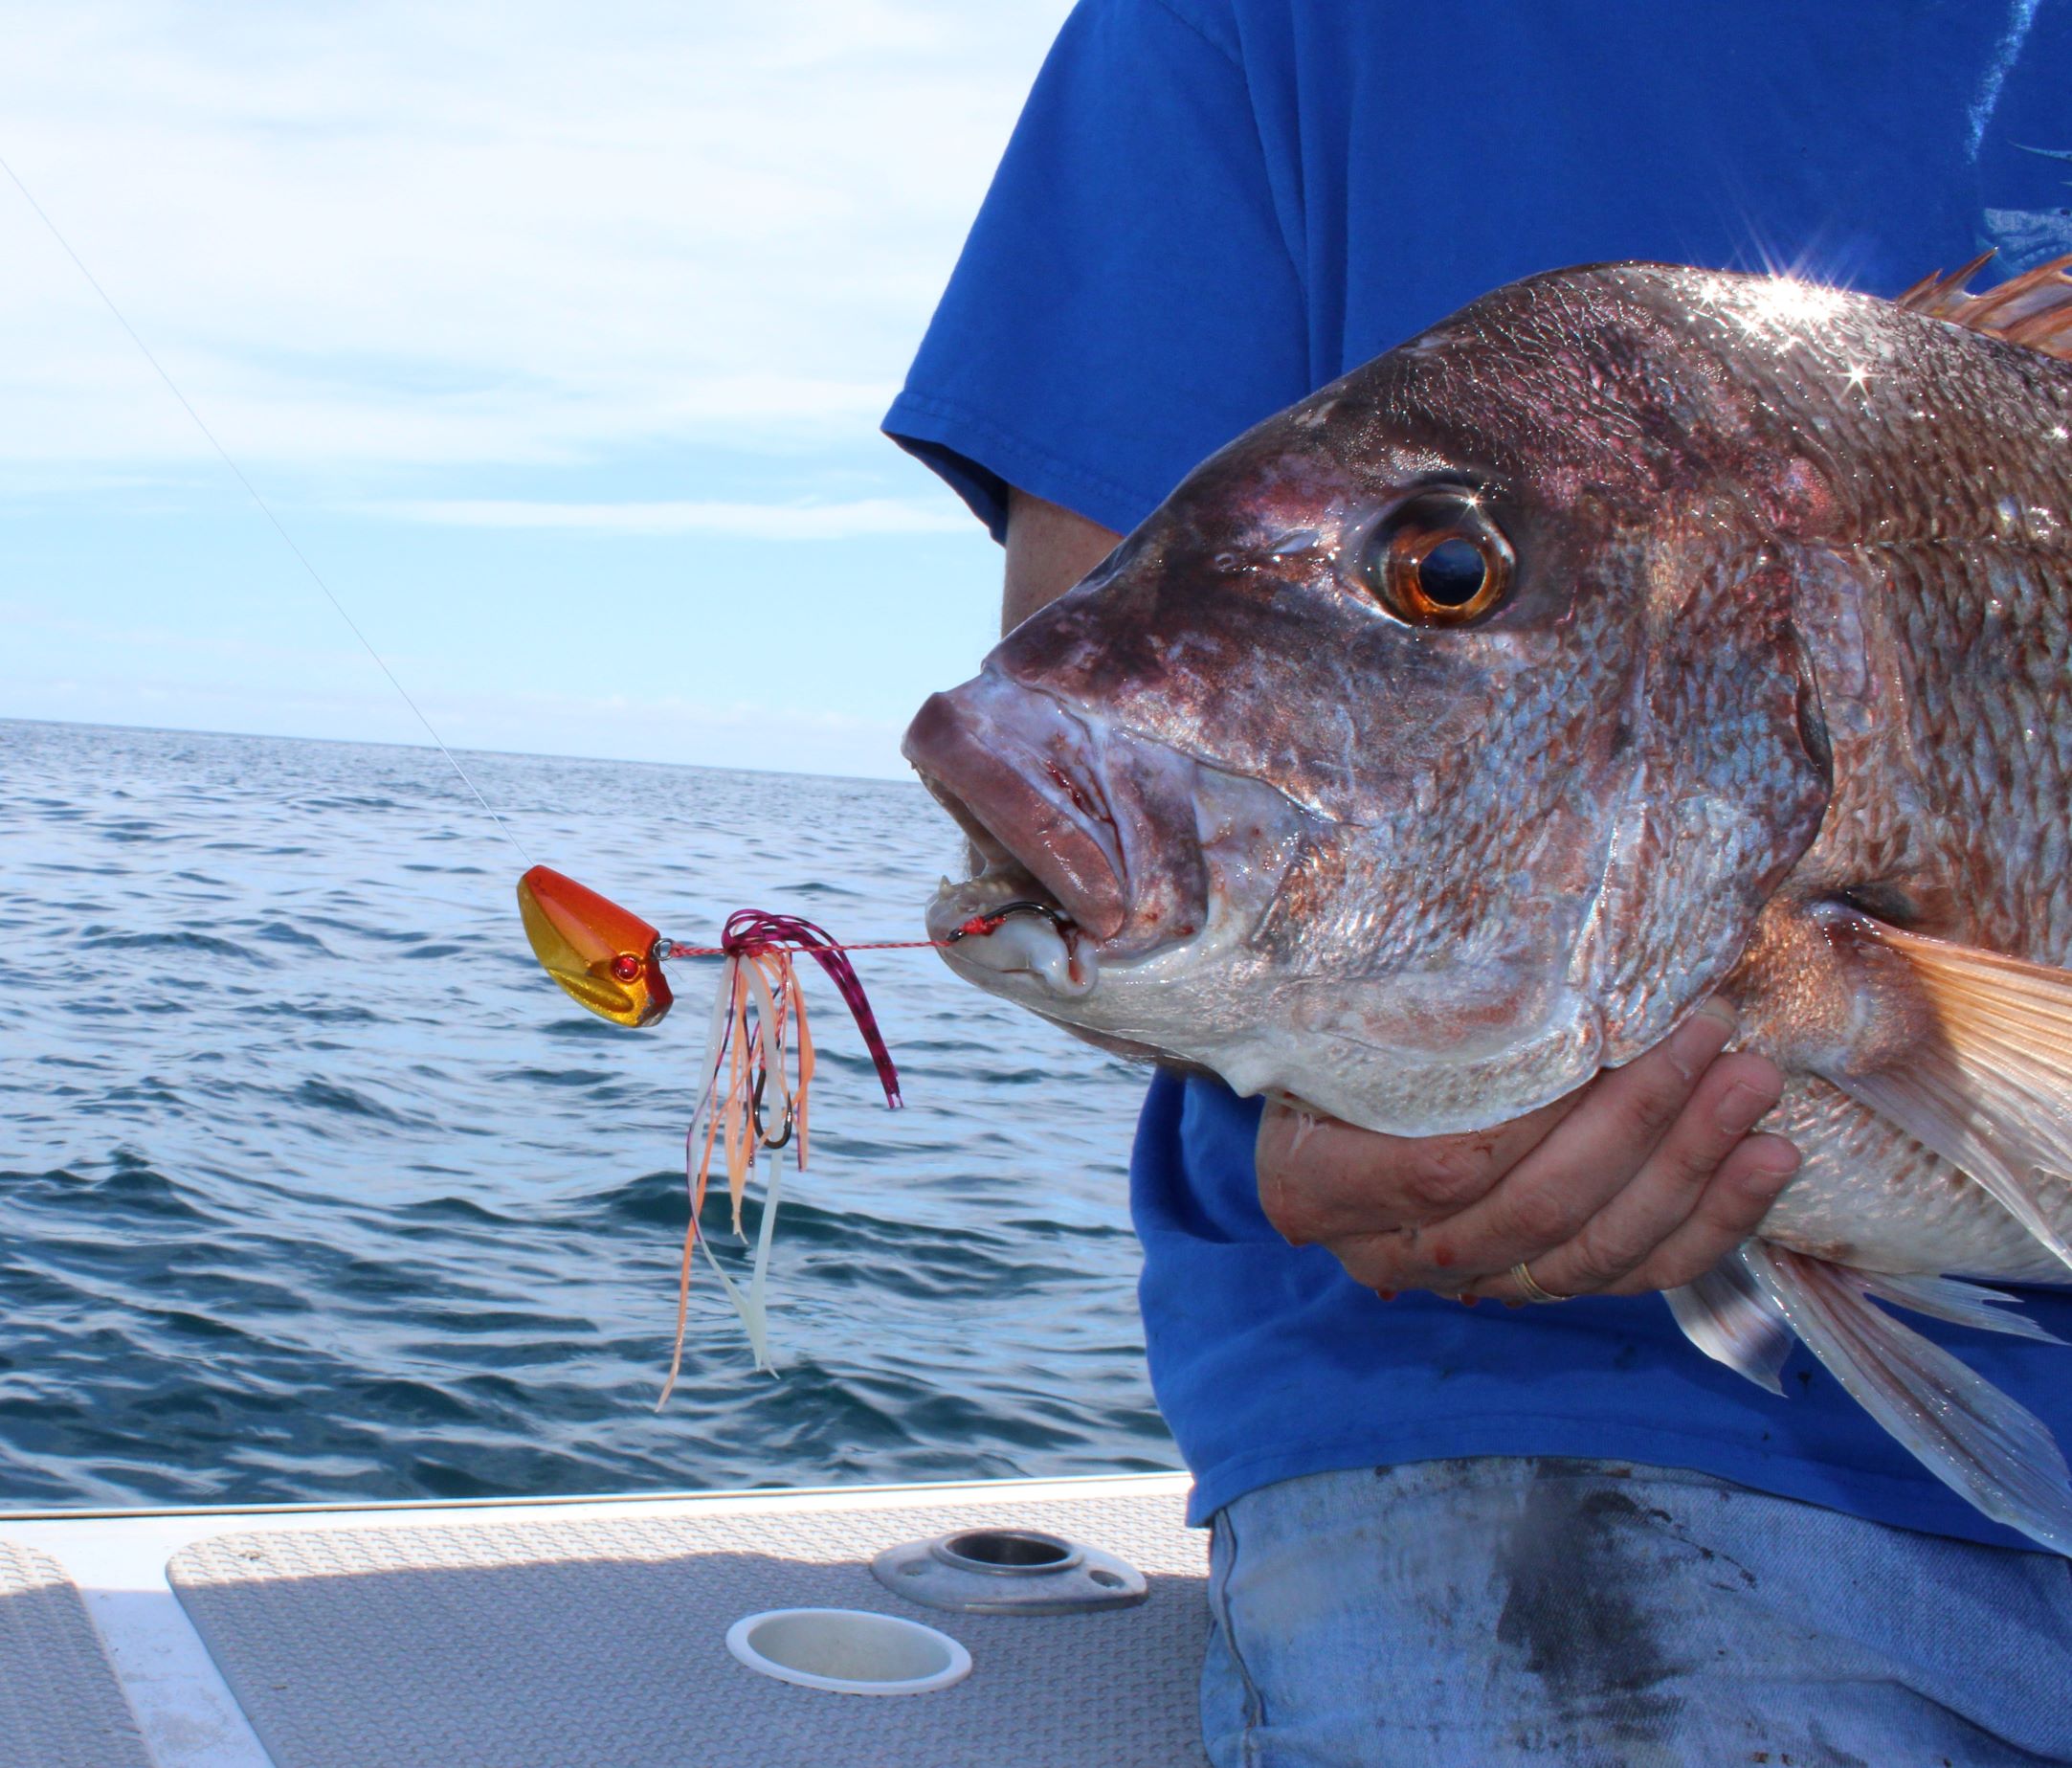 Snapper softbaiting how to turn a slow day fishing into a good day